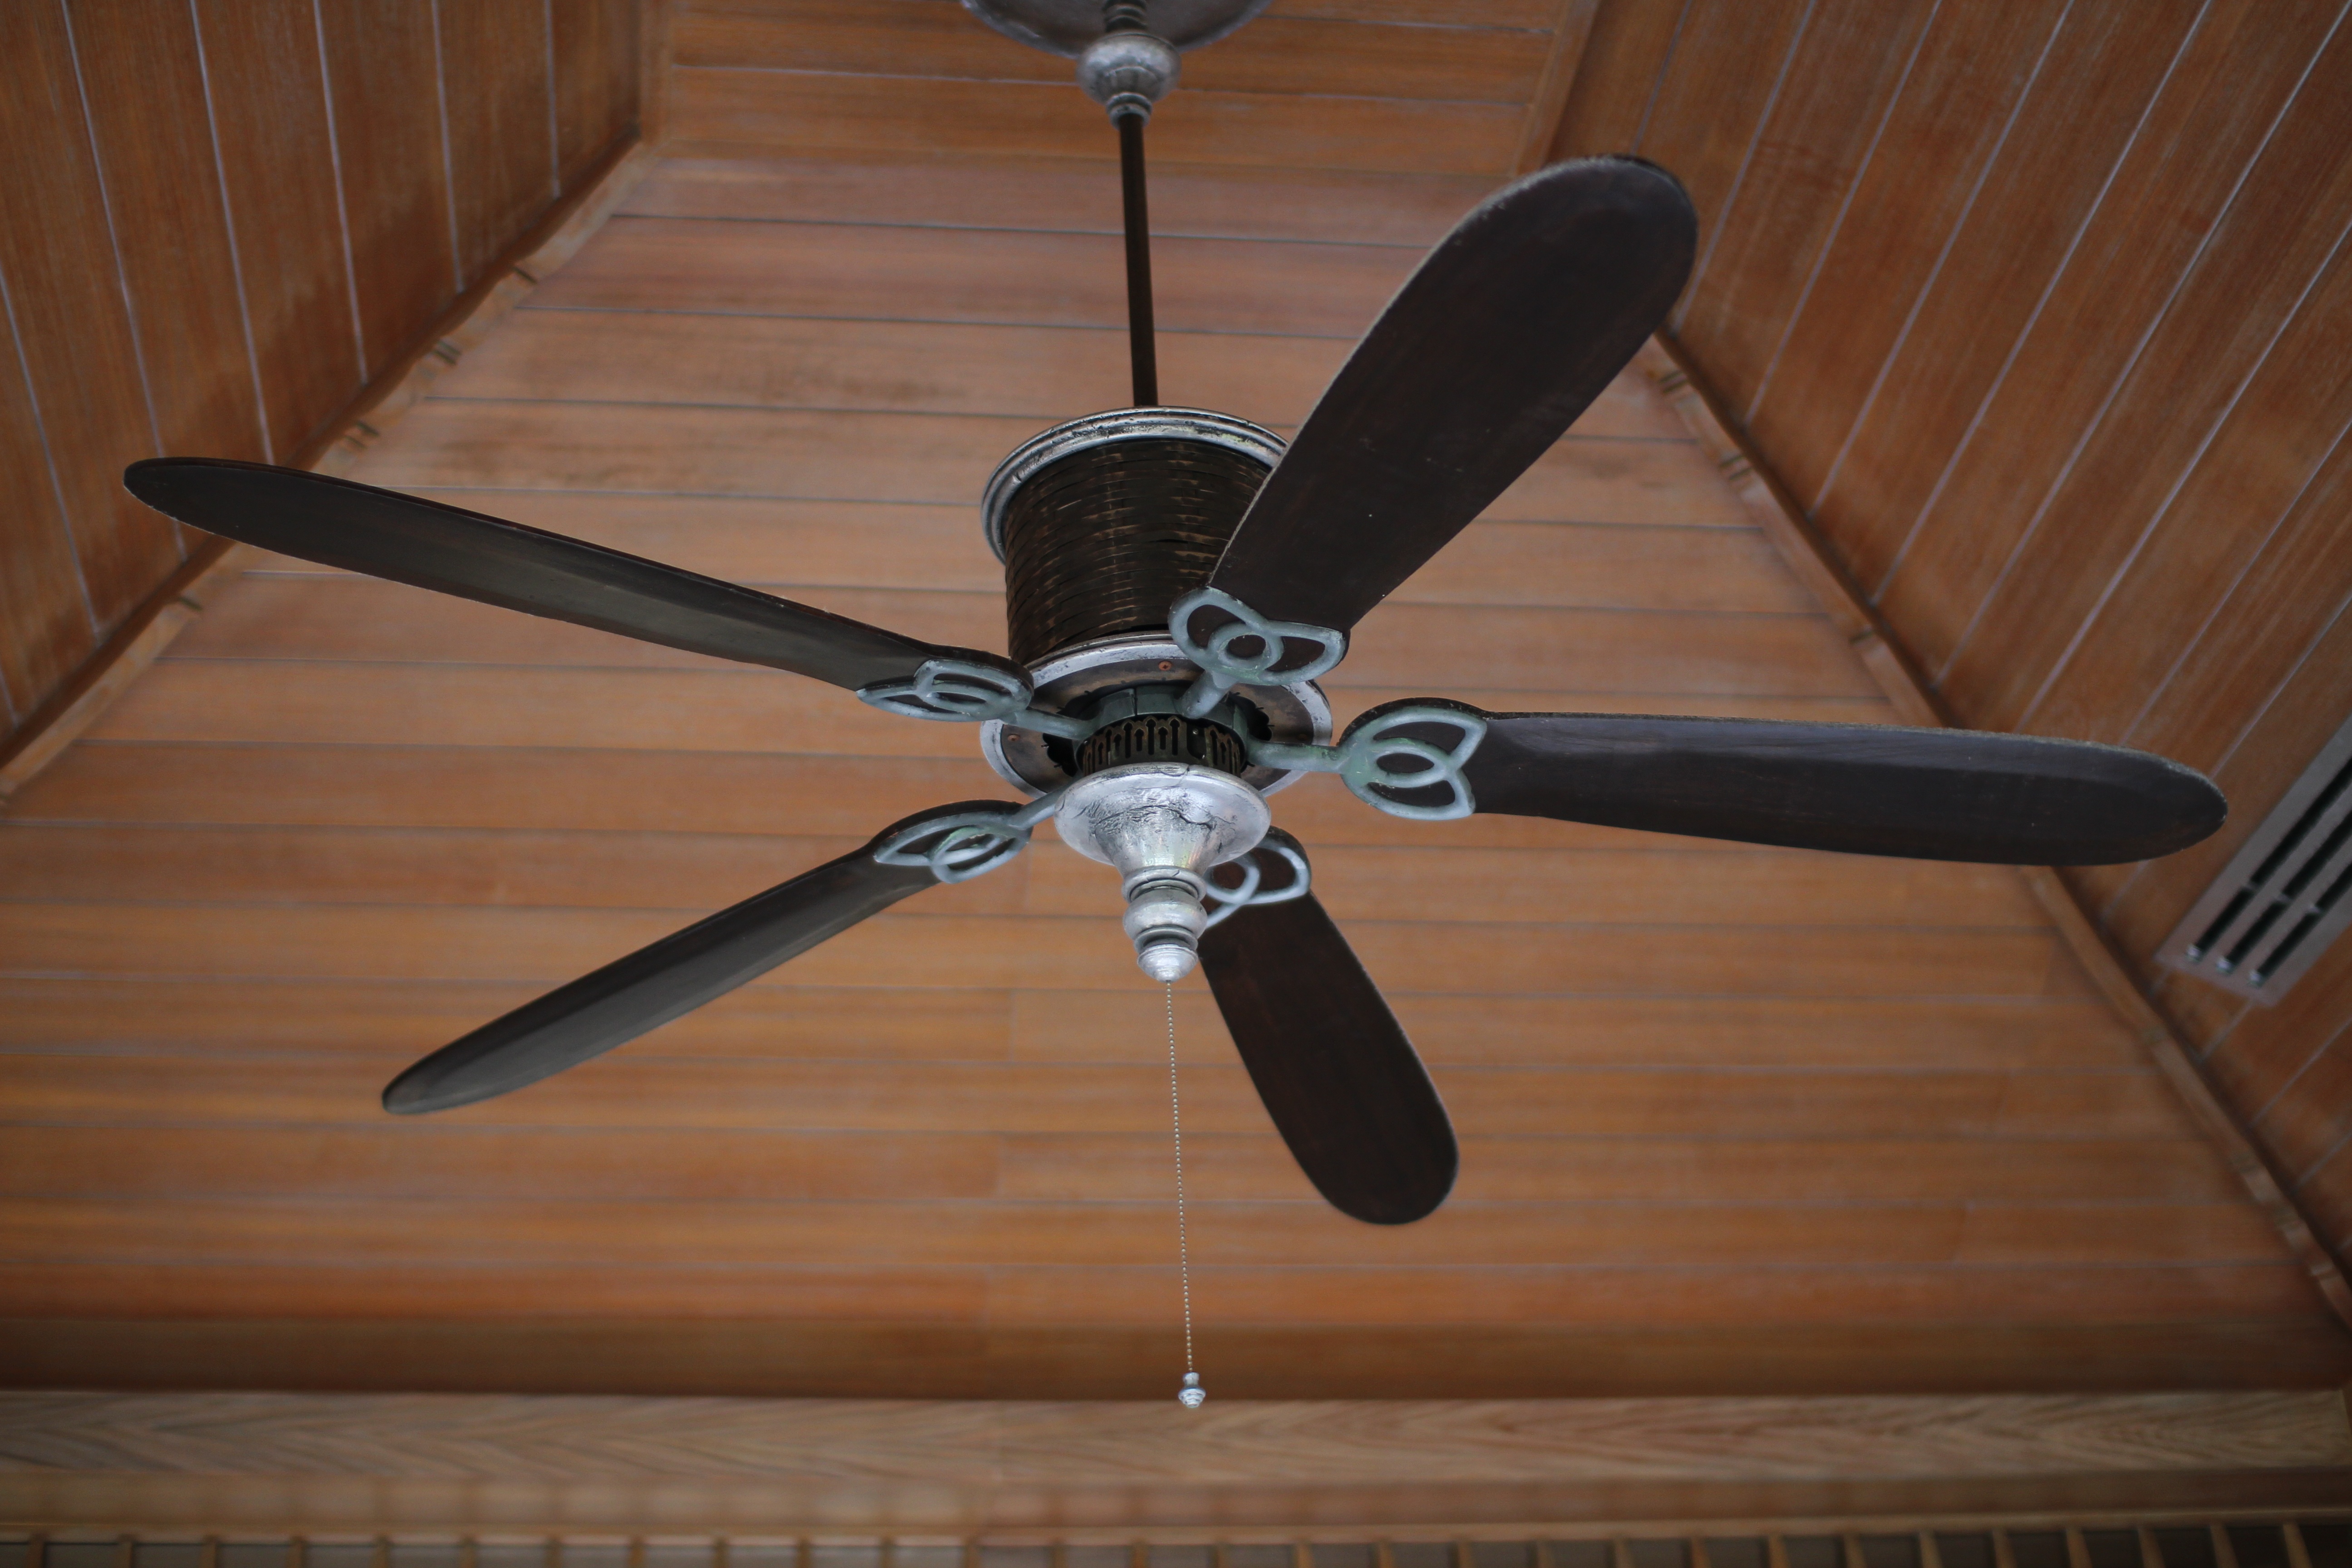 Using a ceiling (or pedestal fan) in combination with the air-conditioner is a clever way to save.